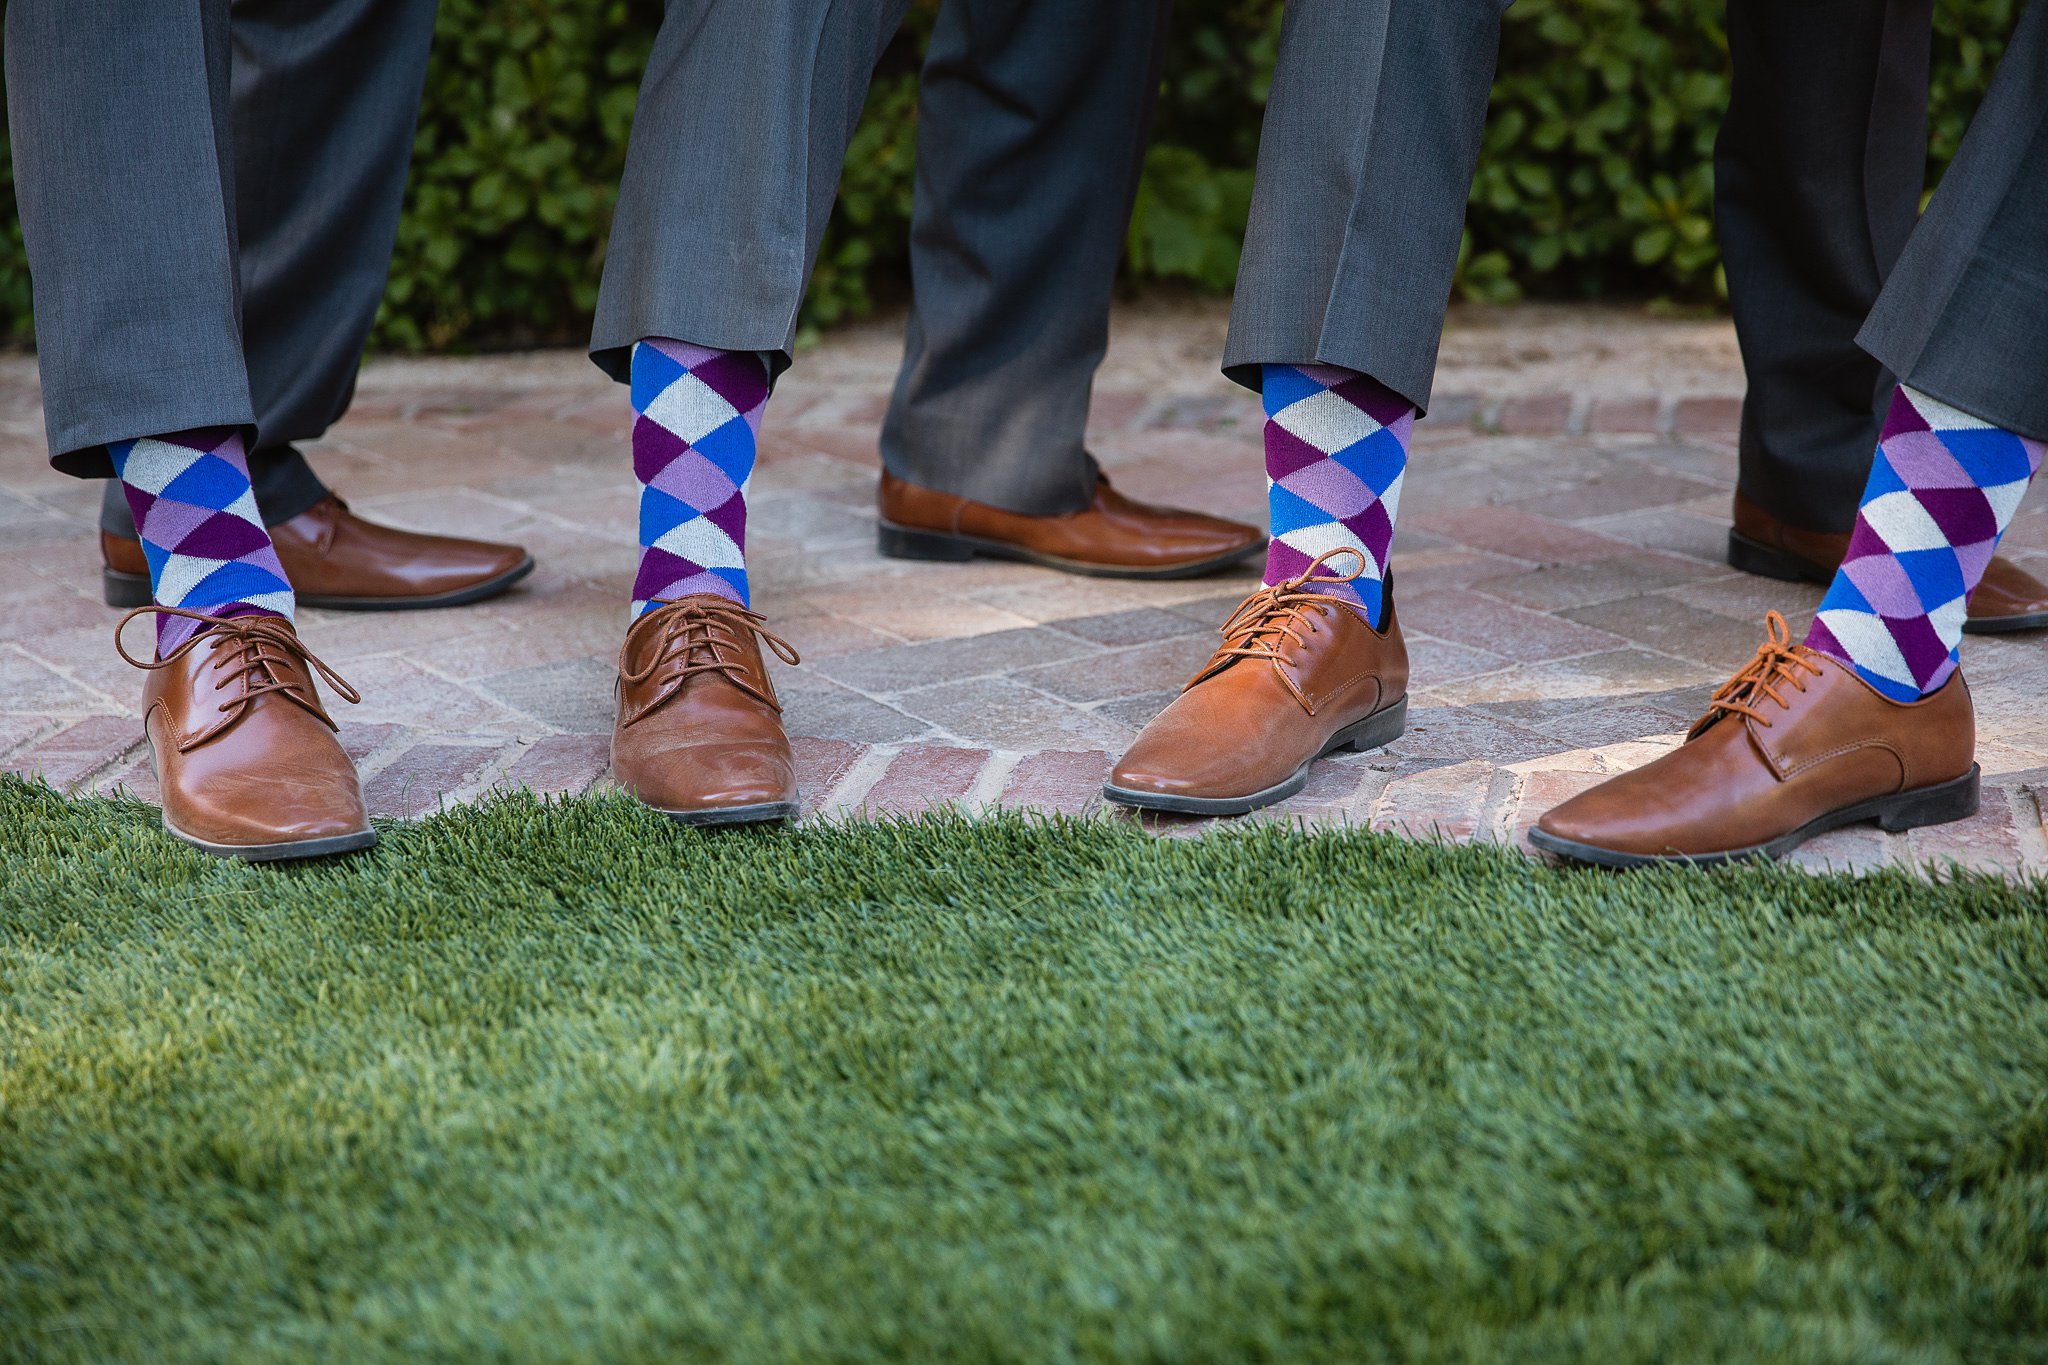 Groomsmen purple and grey colored socks in brown dress shoes by wedding photographer PMA Photography.